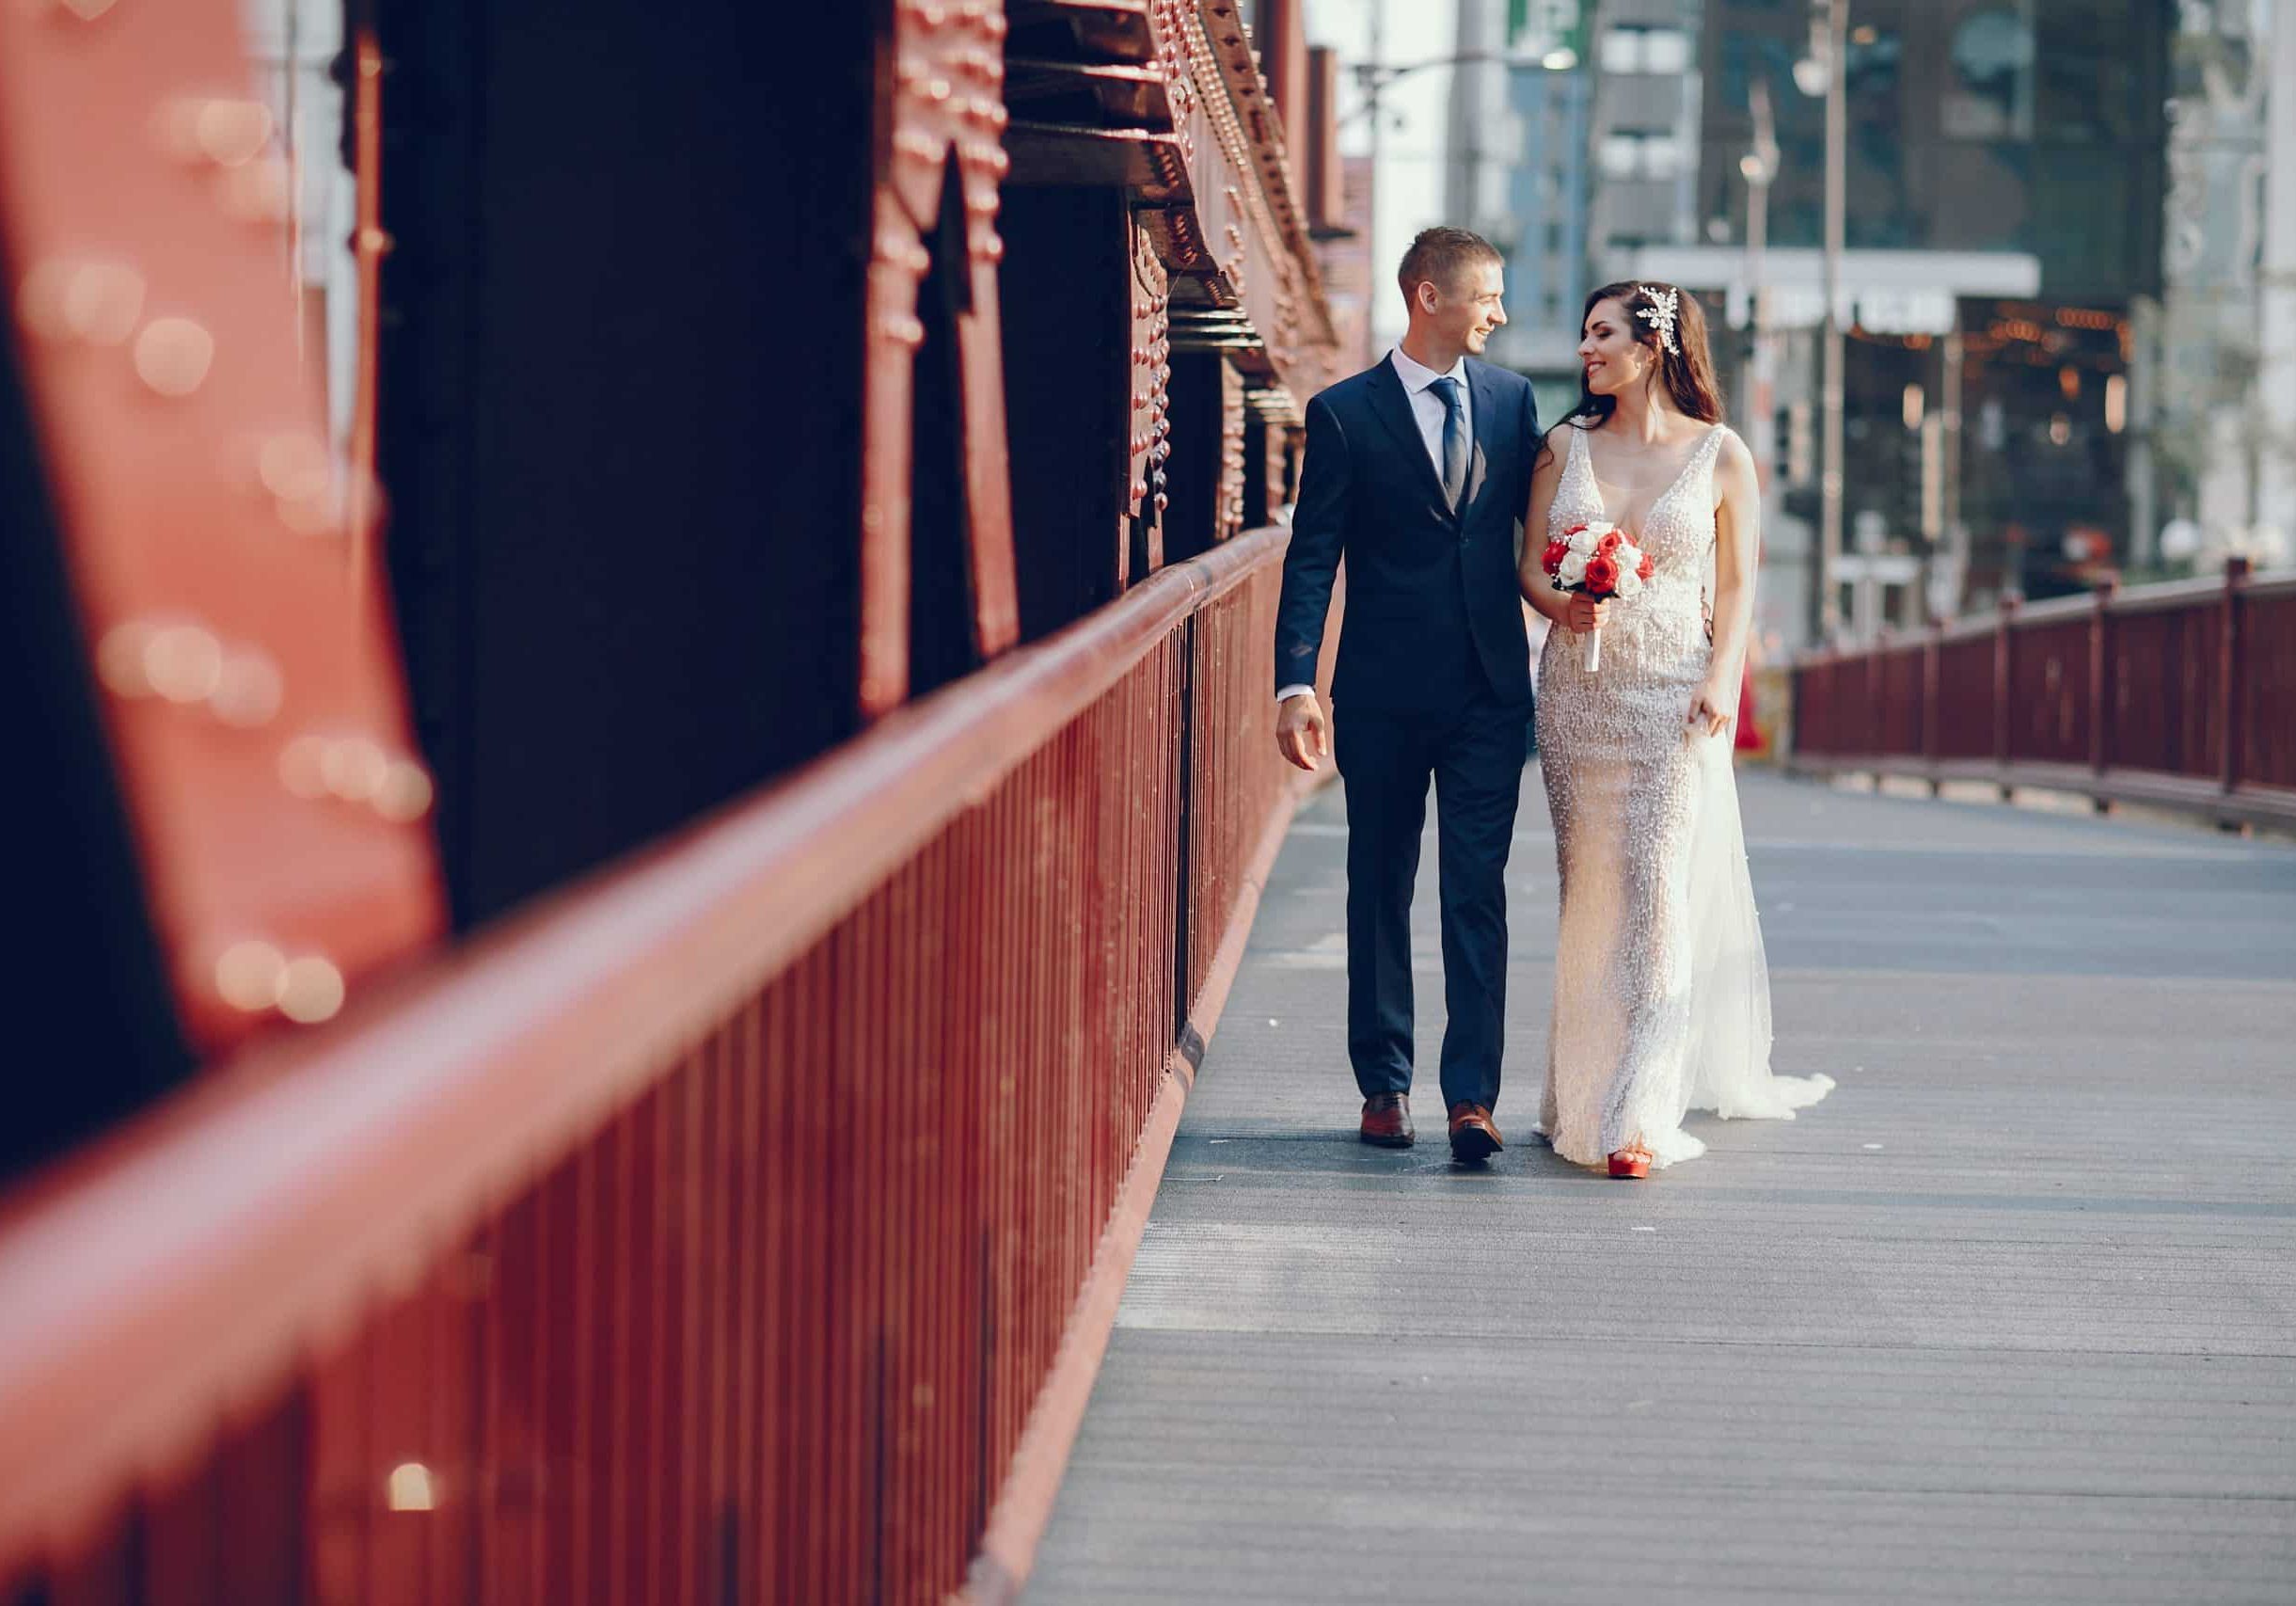 Elegant wedding couple walking in a summer city near brige. Man in a blue suit. Woman in a white elegant dress with bouquet of roses